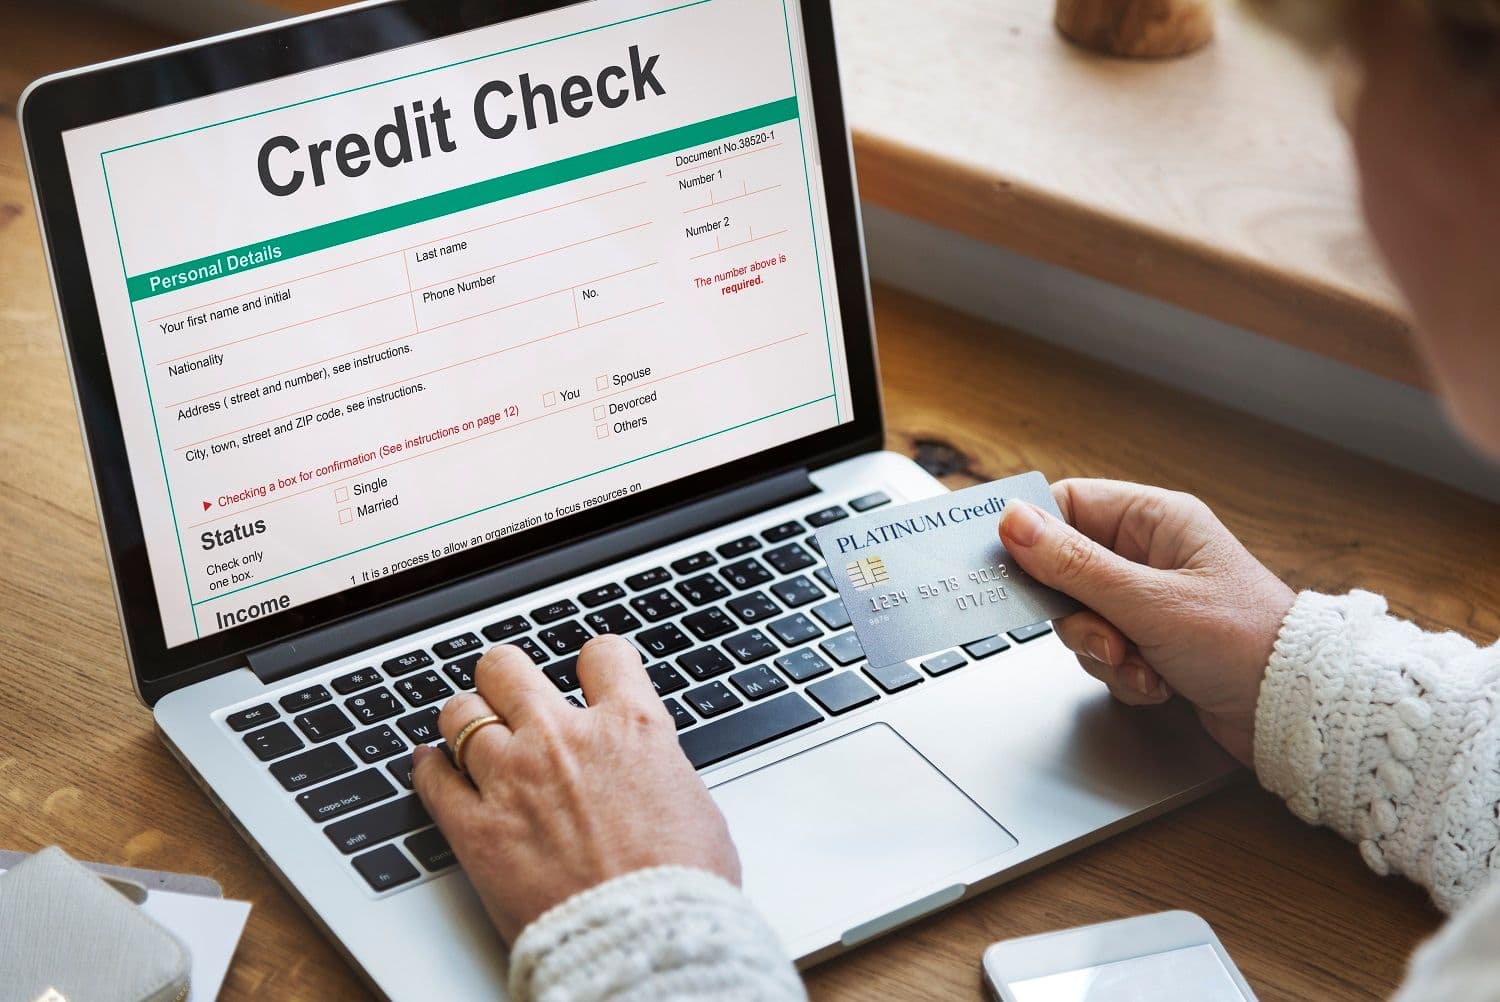 Small Business Loans without Credit Check: All You Need to Know